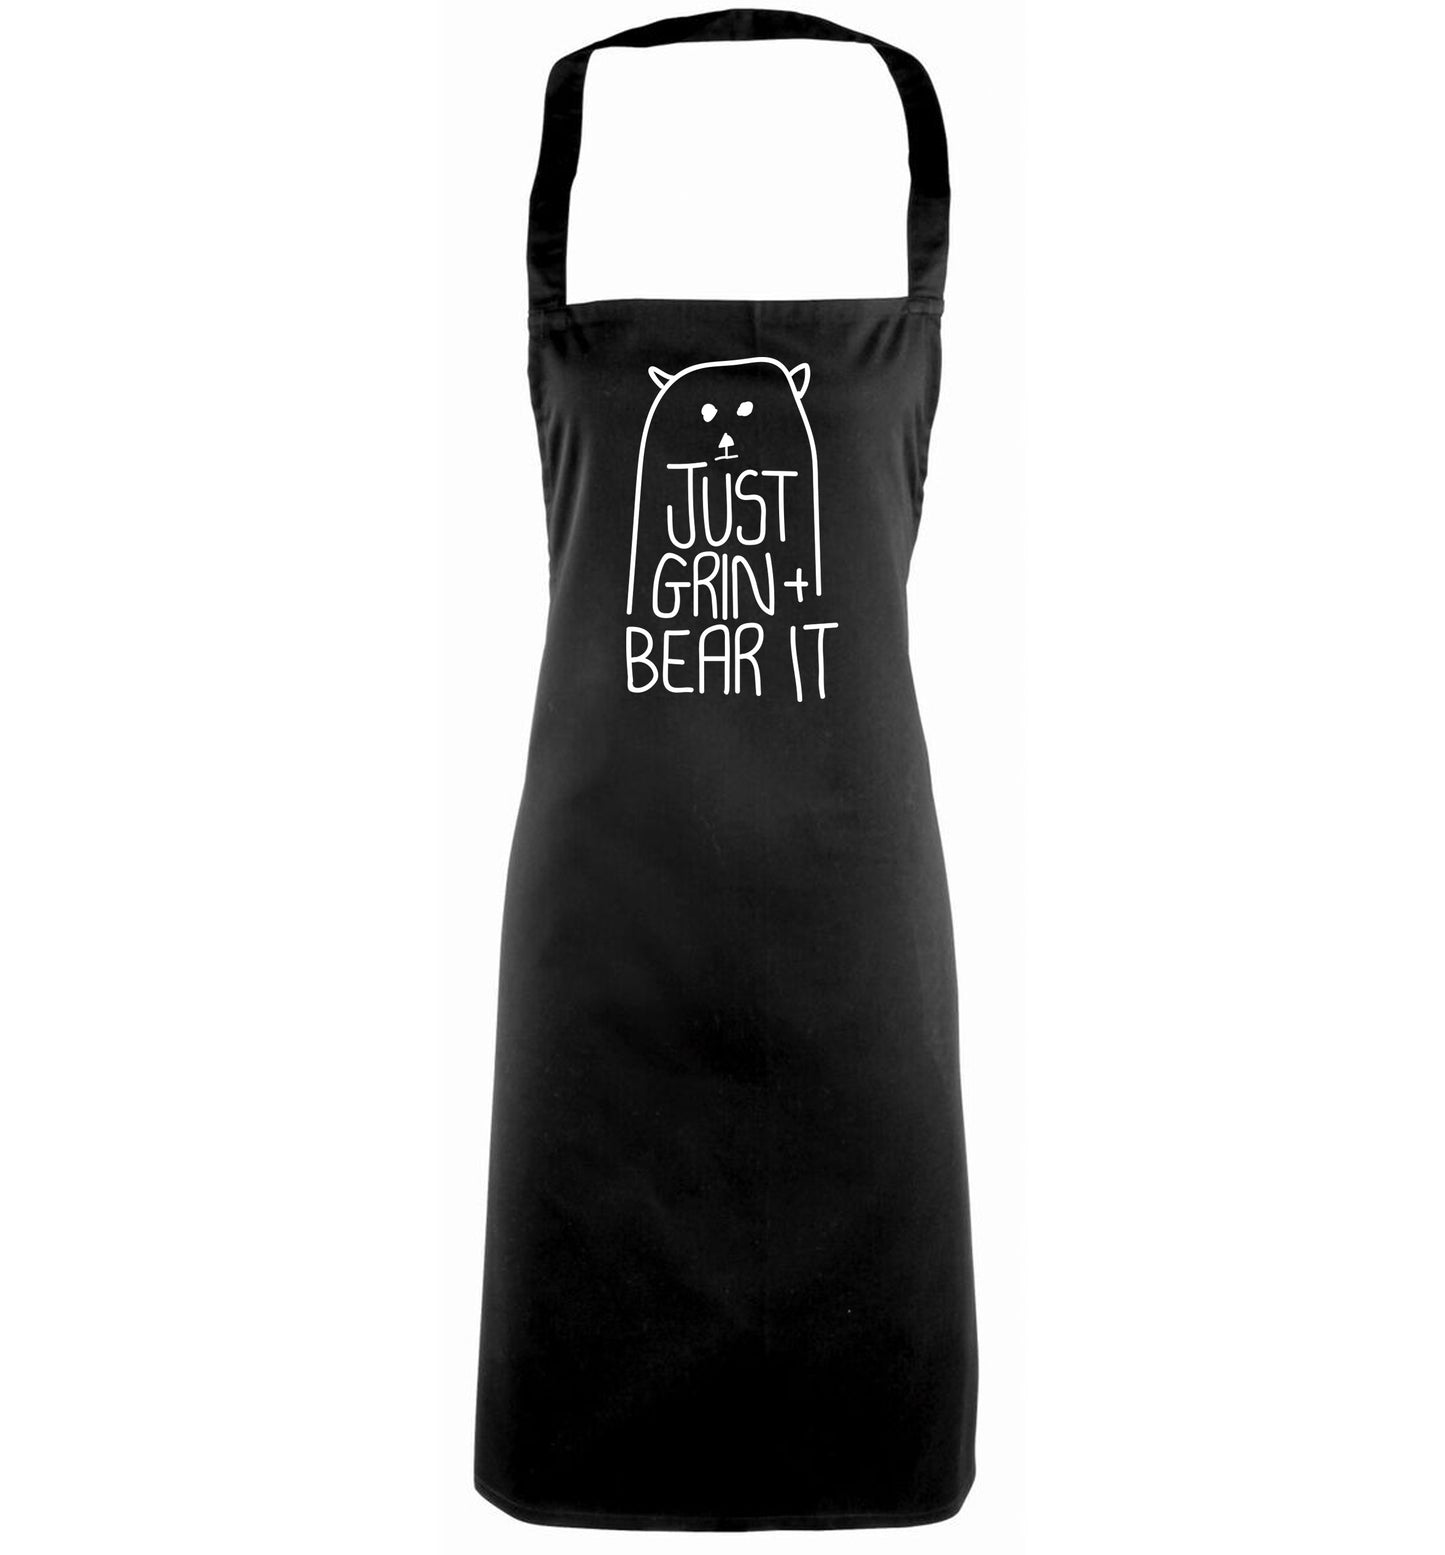 Just grin and bear it black apron